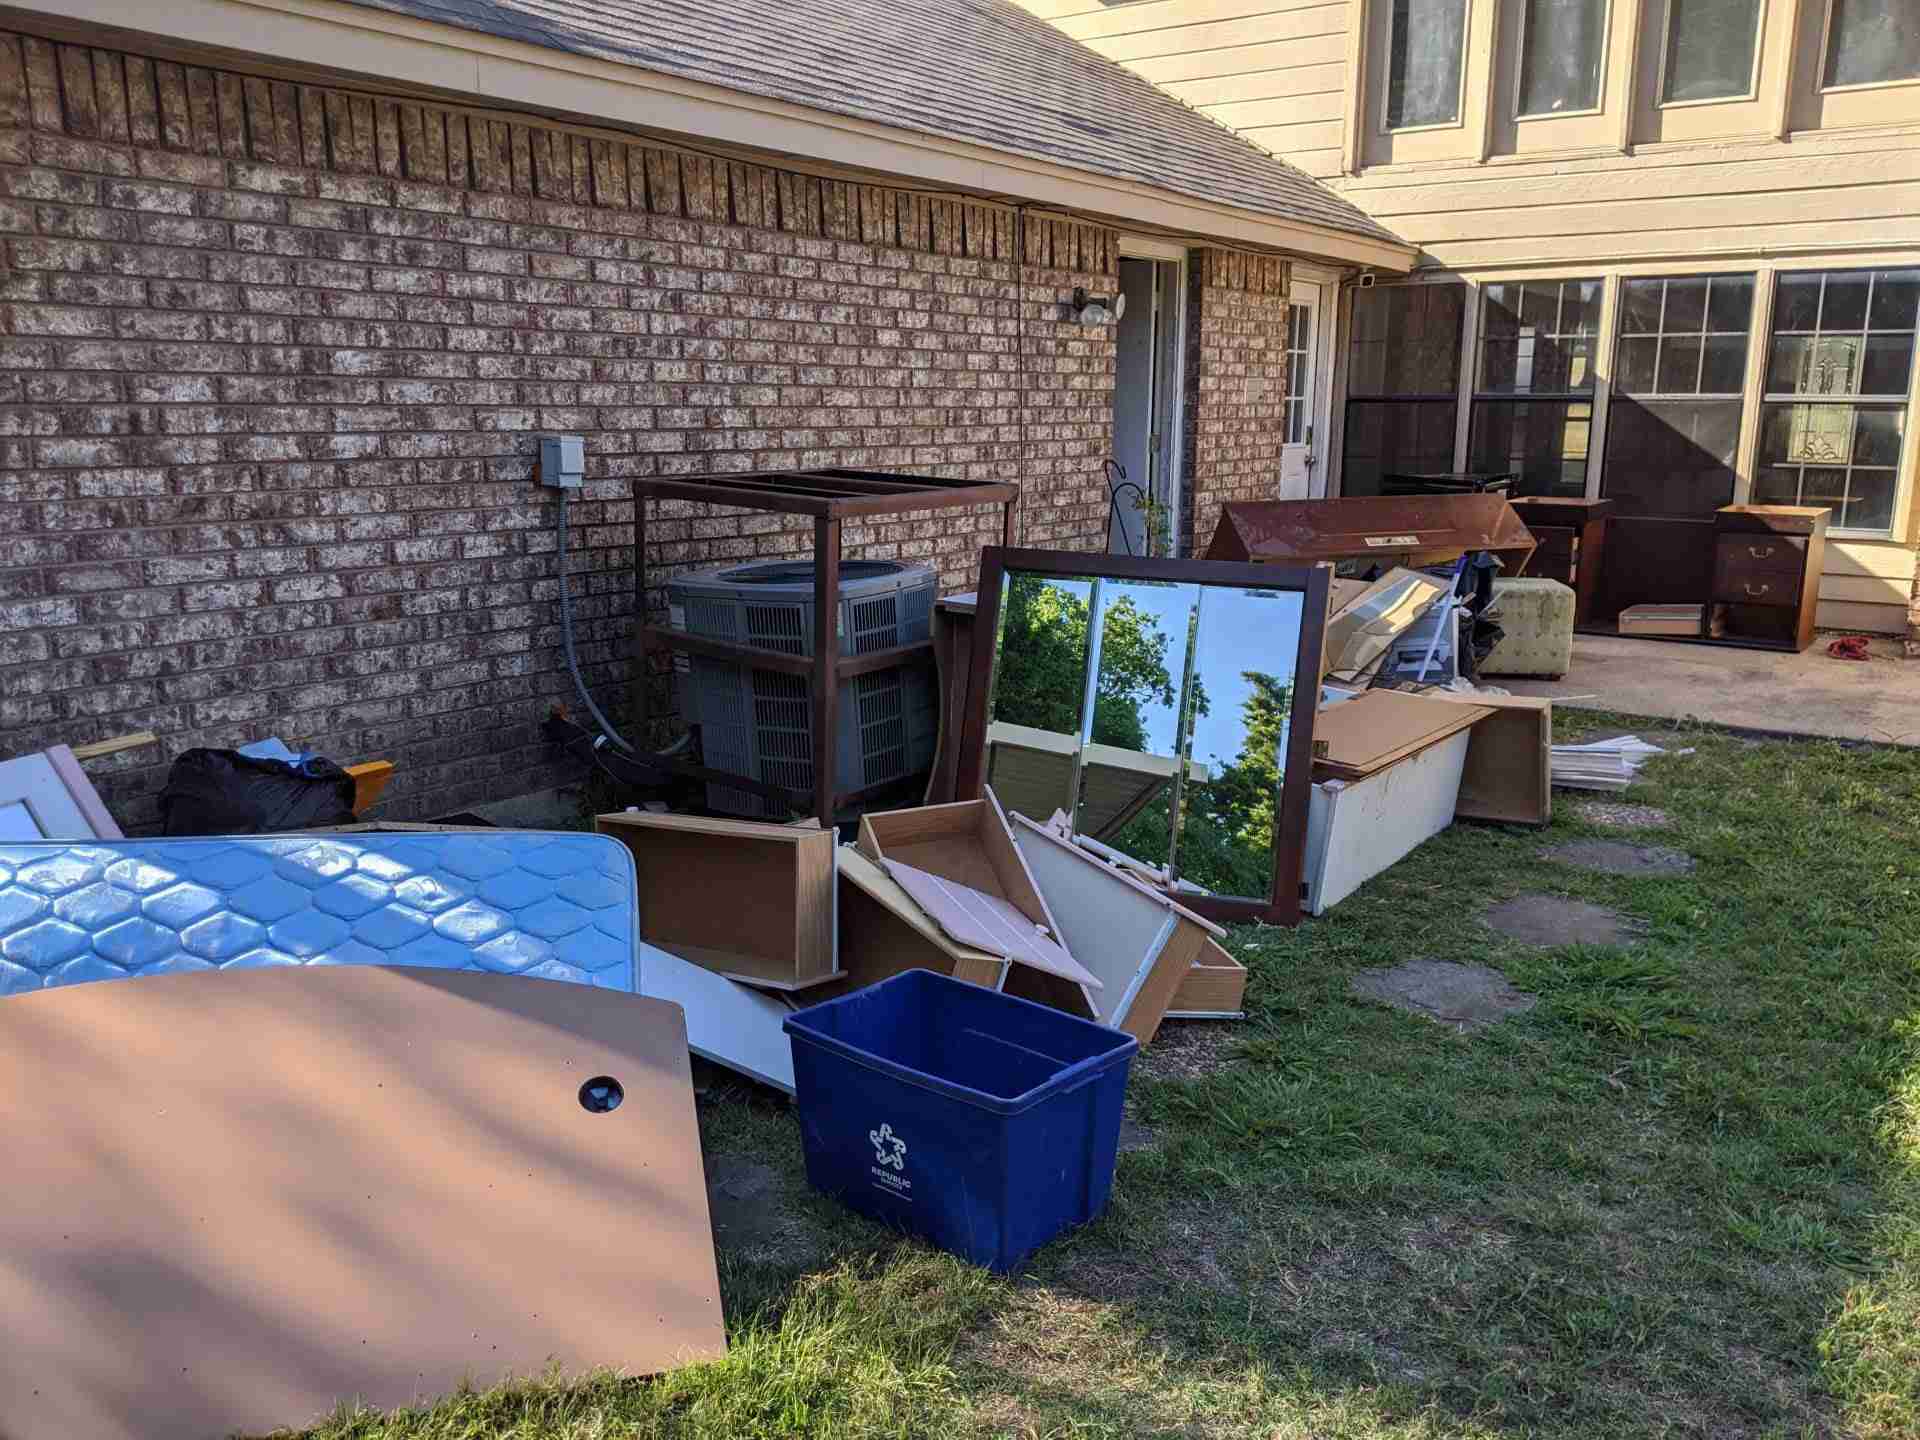 Dumpsters Rental & Junk Removal in Fort Worth, TX